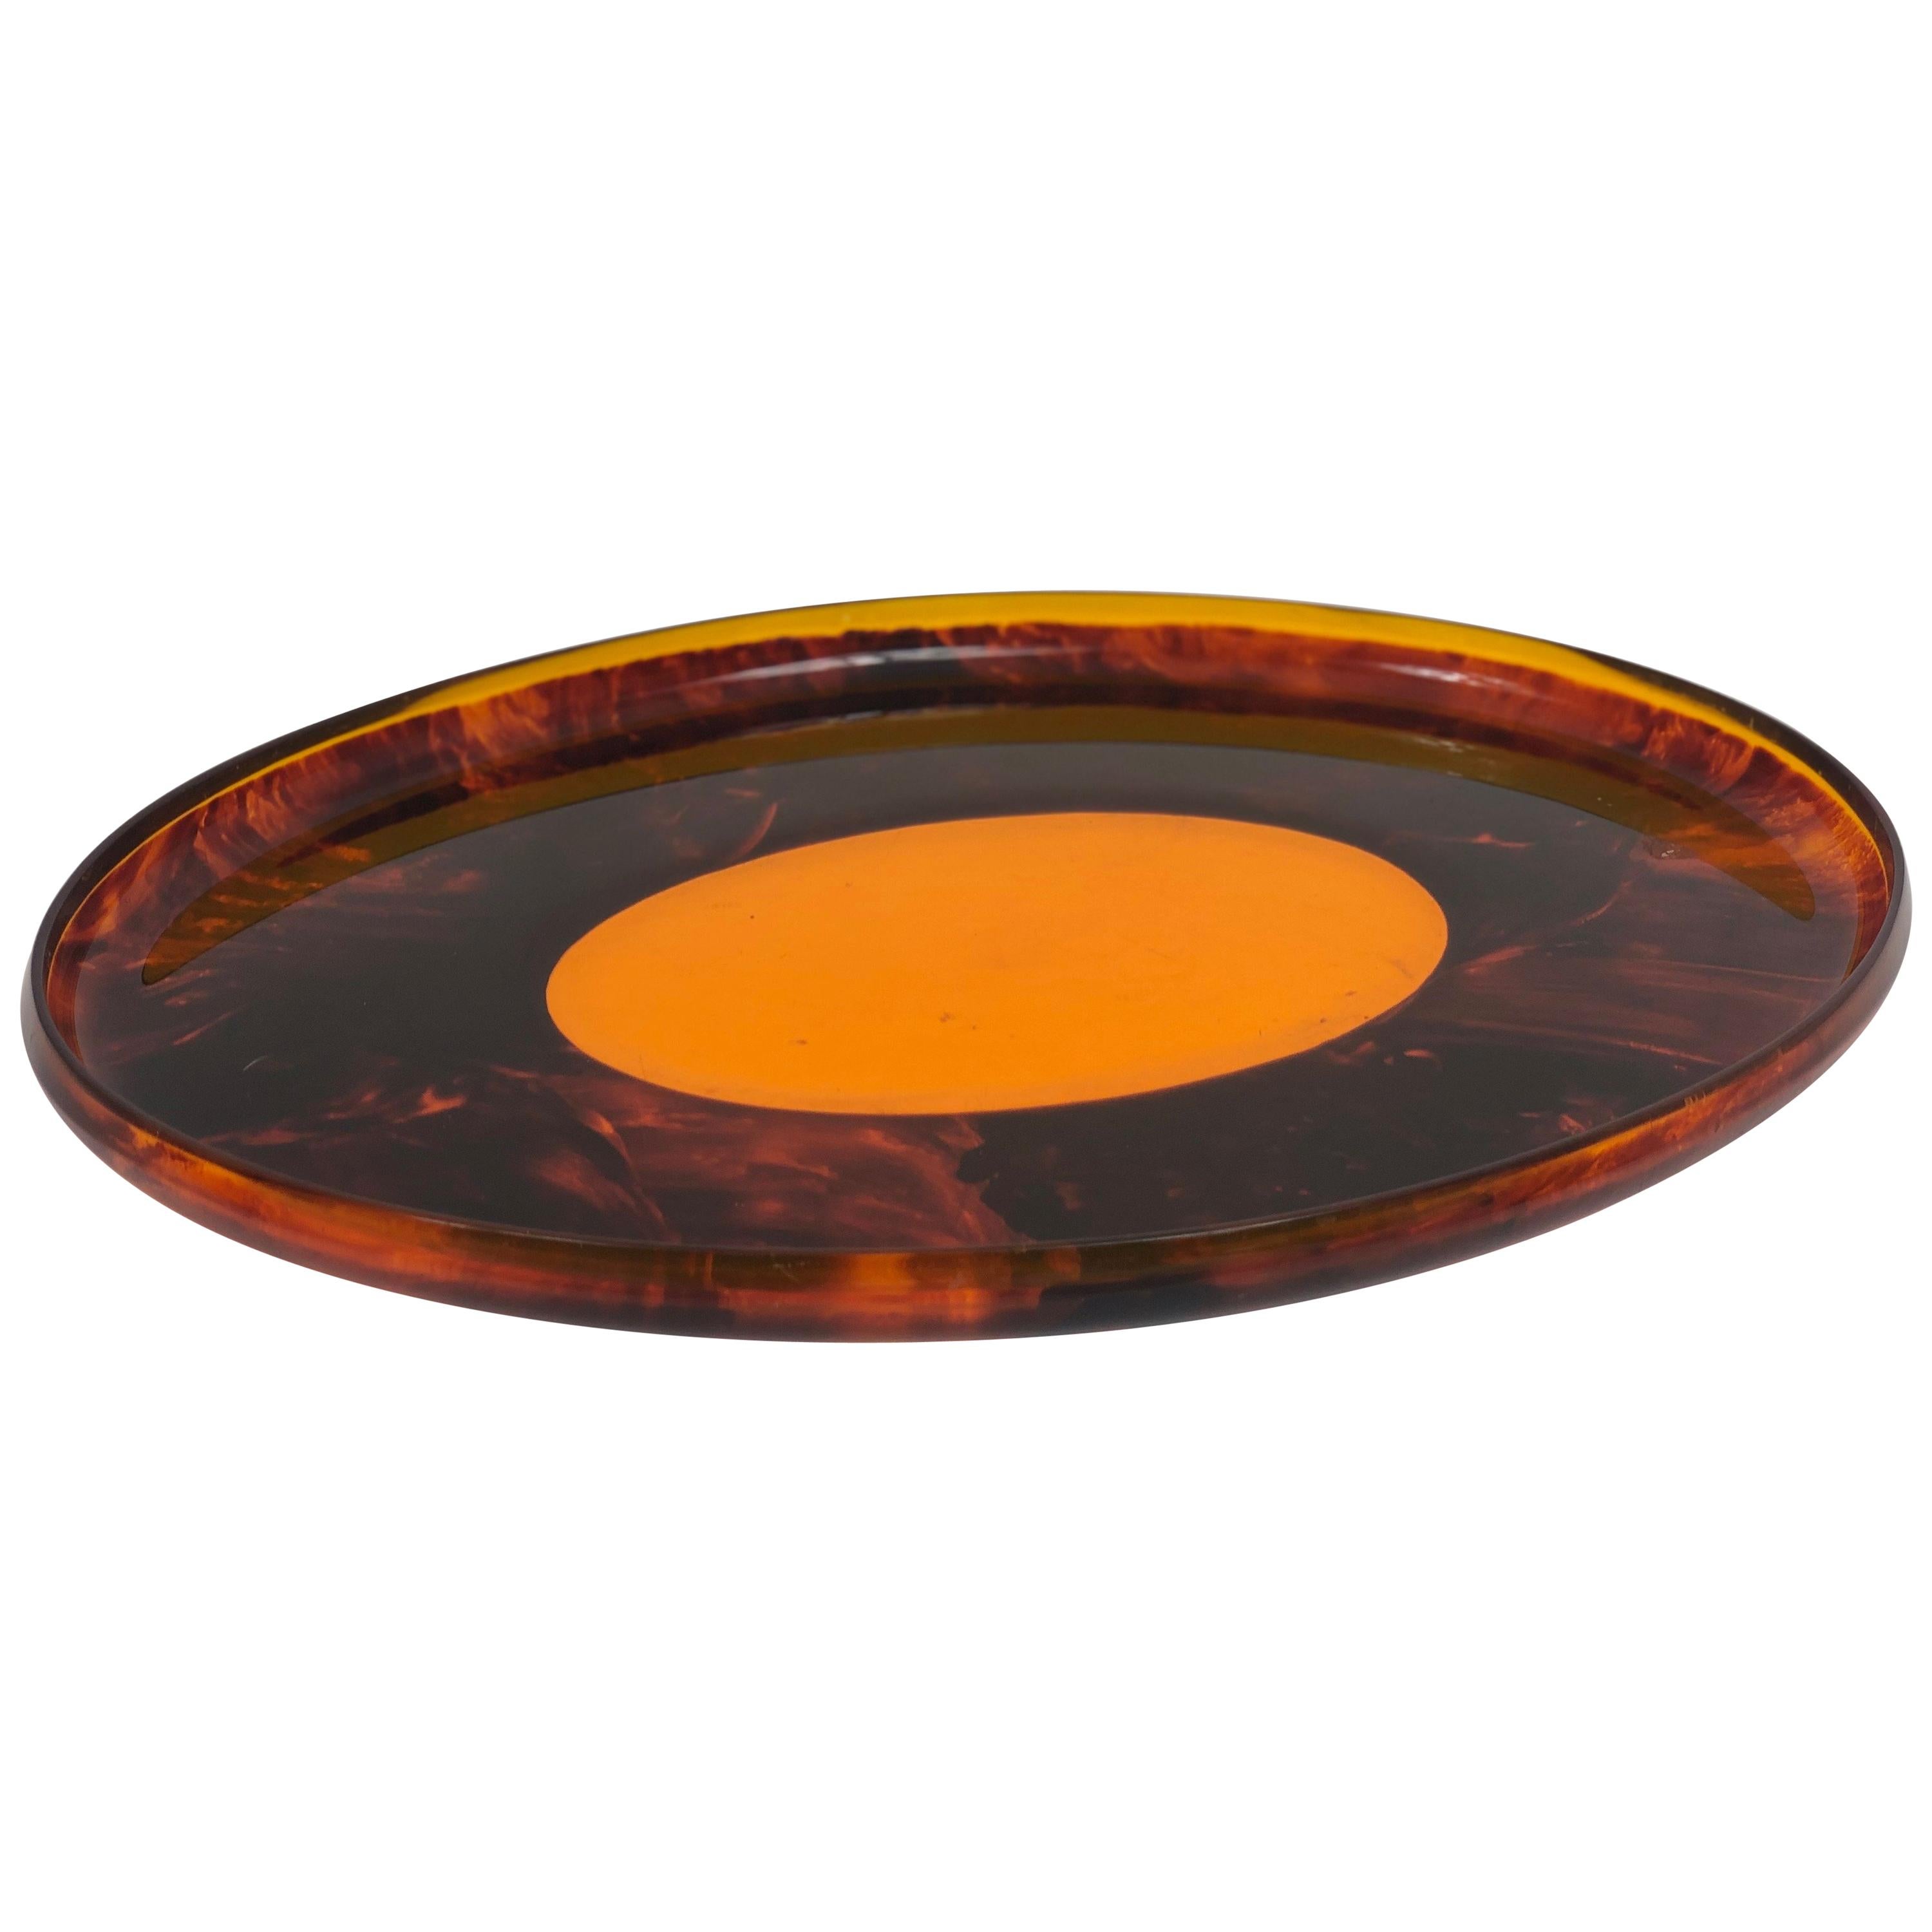 Faux Tortoiseshell Serving Oval Tray Centerpiece in Lucite, 1970s, Italy